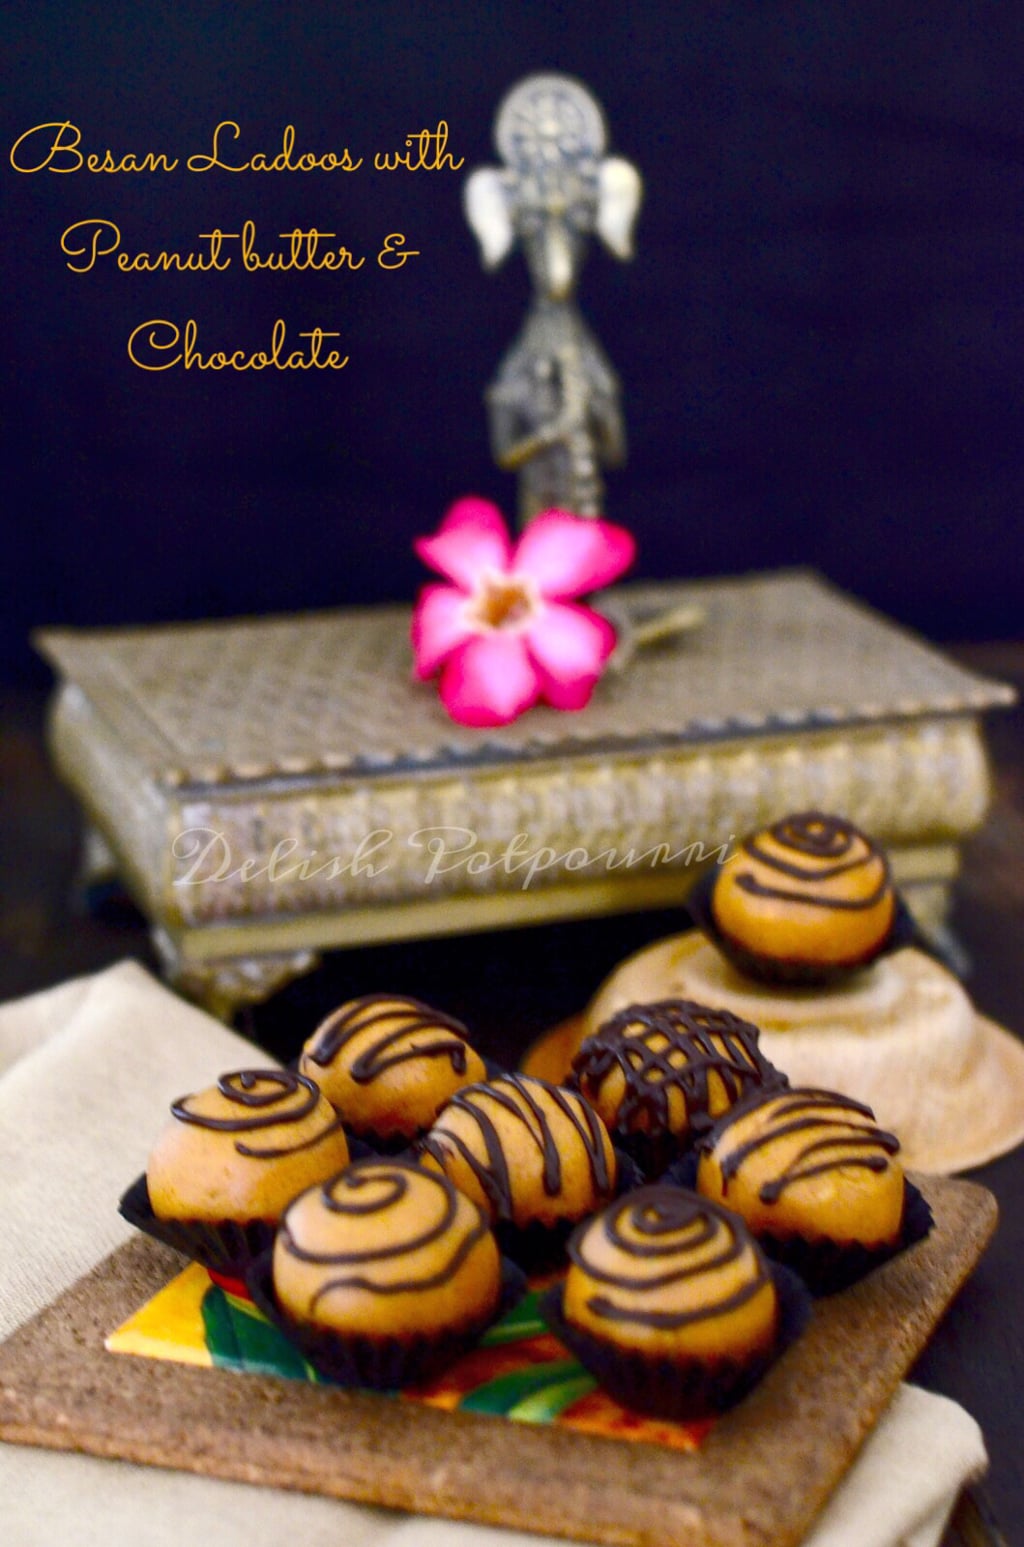 Besan Ladoo with Peanut butter and Chocolate drizzle